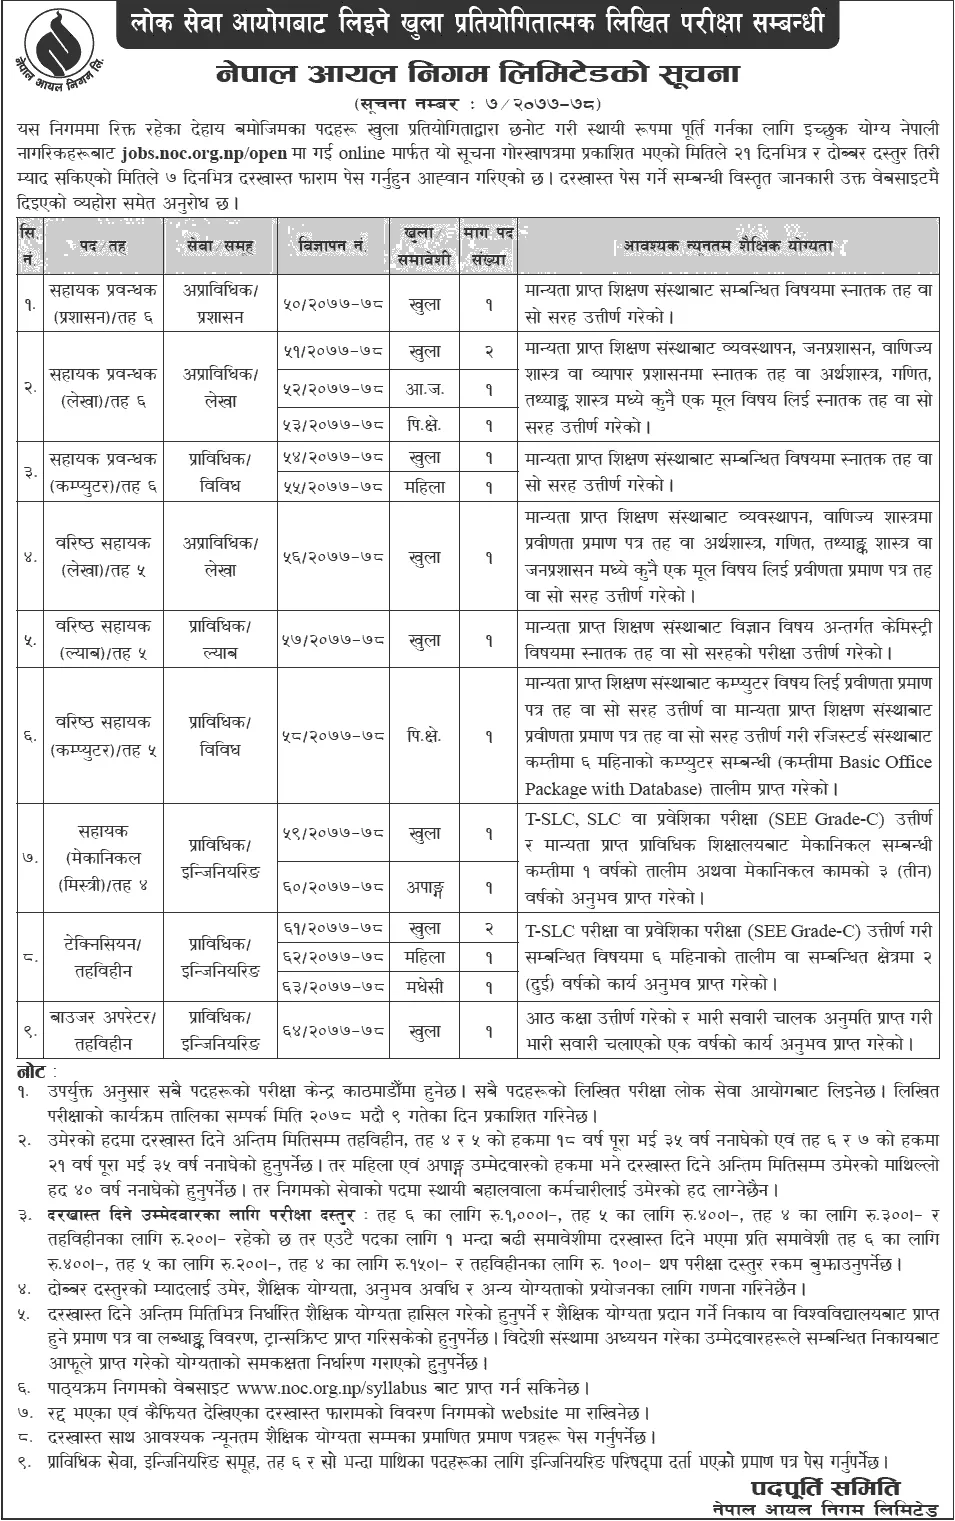 Jobs at Nepal Oil Corporation (Nepal Oil Nigam)